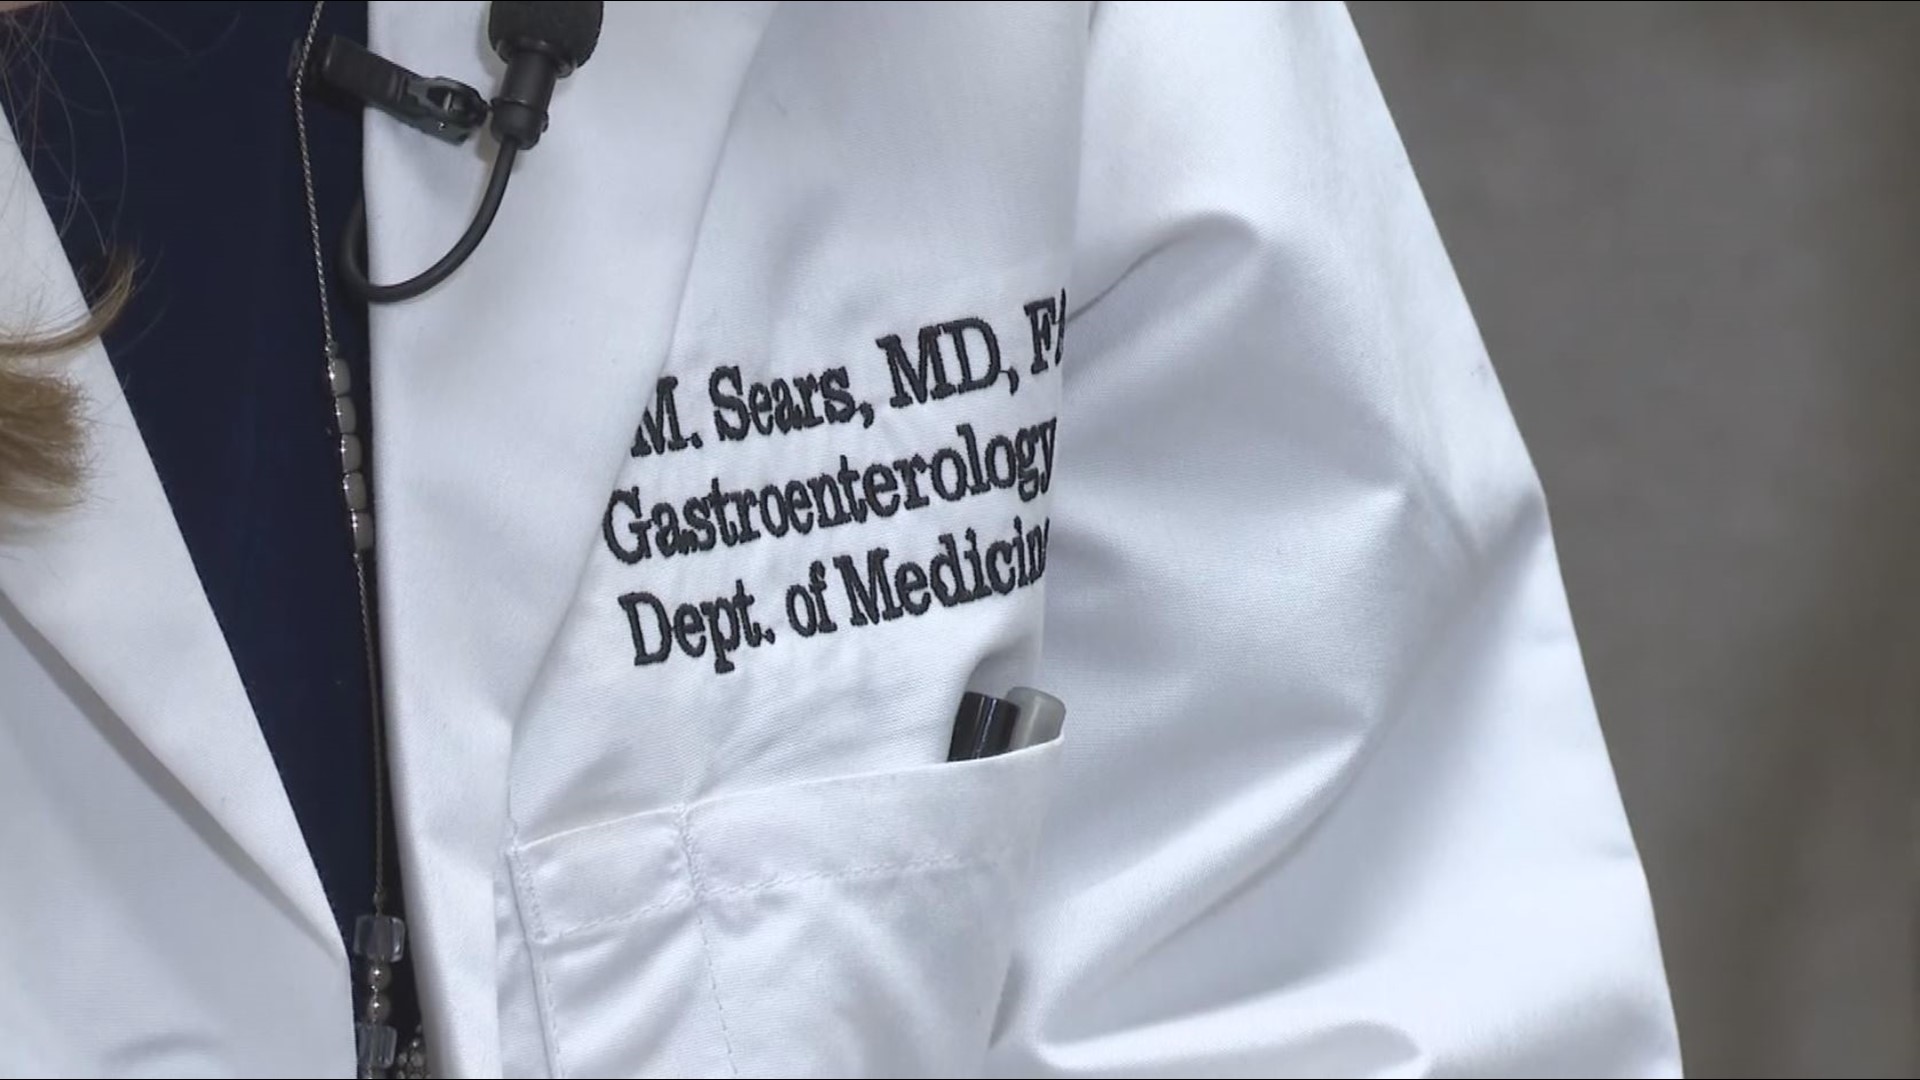 Dr. Dawn Sears' gender is what makes her success so rare as one of few female gastroenterologists nationwide.